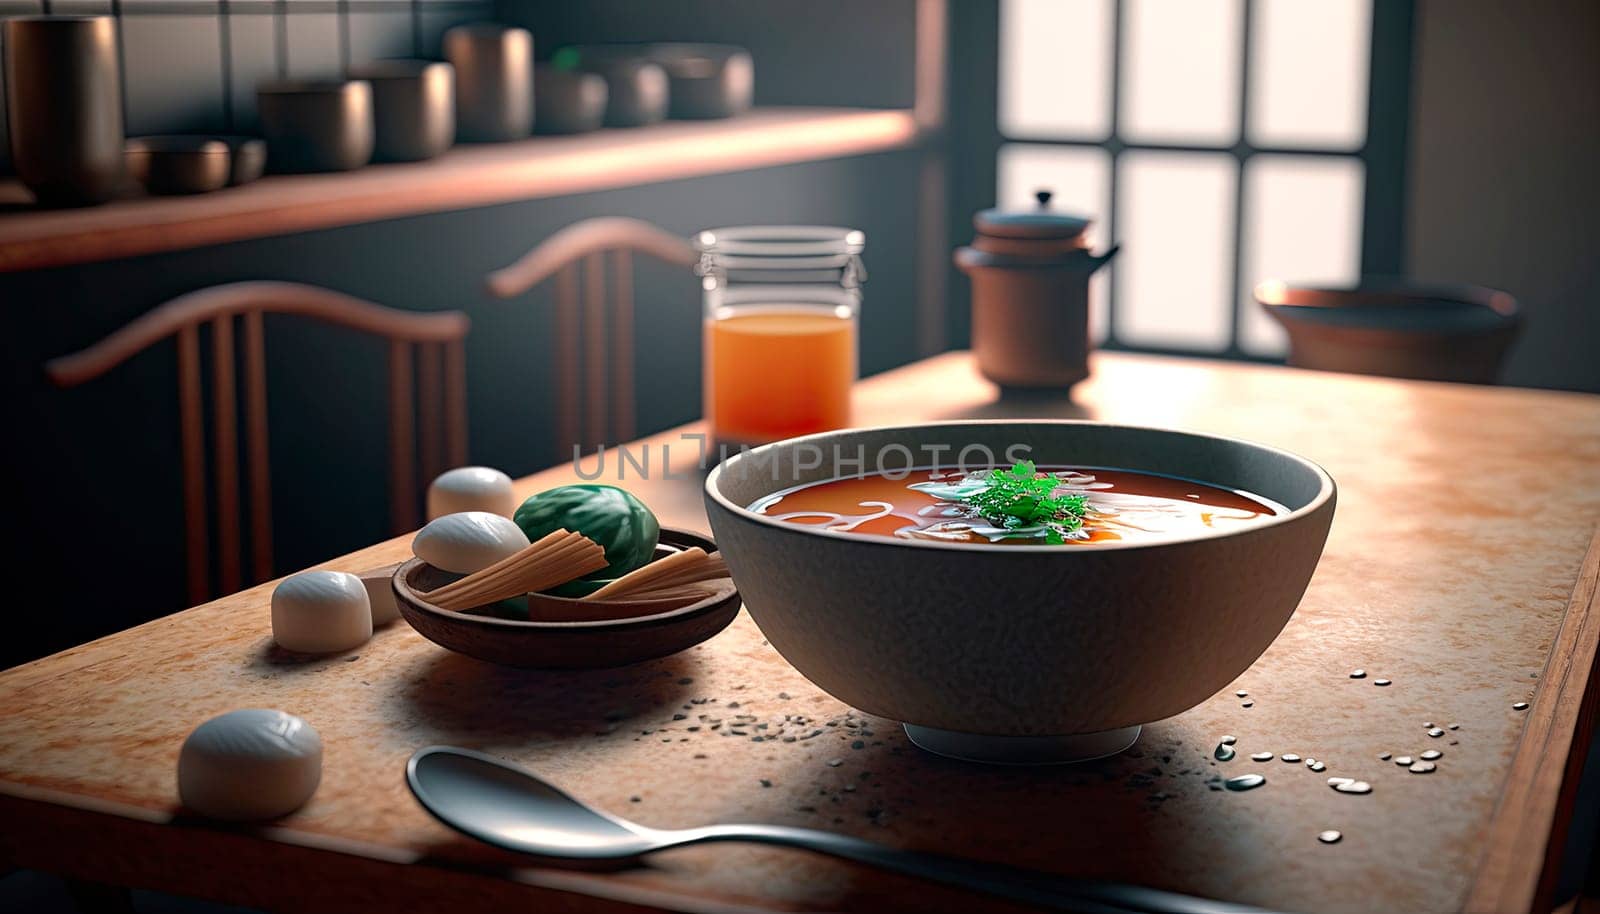 a bowl of hong kong style soup on the table in the kitchen during the day. by yanadjana